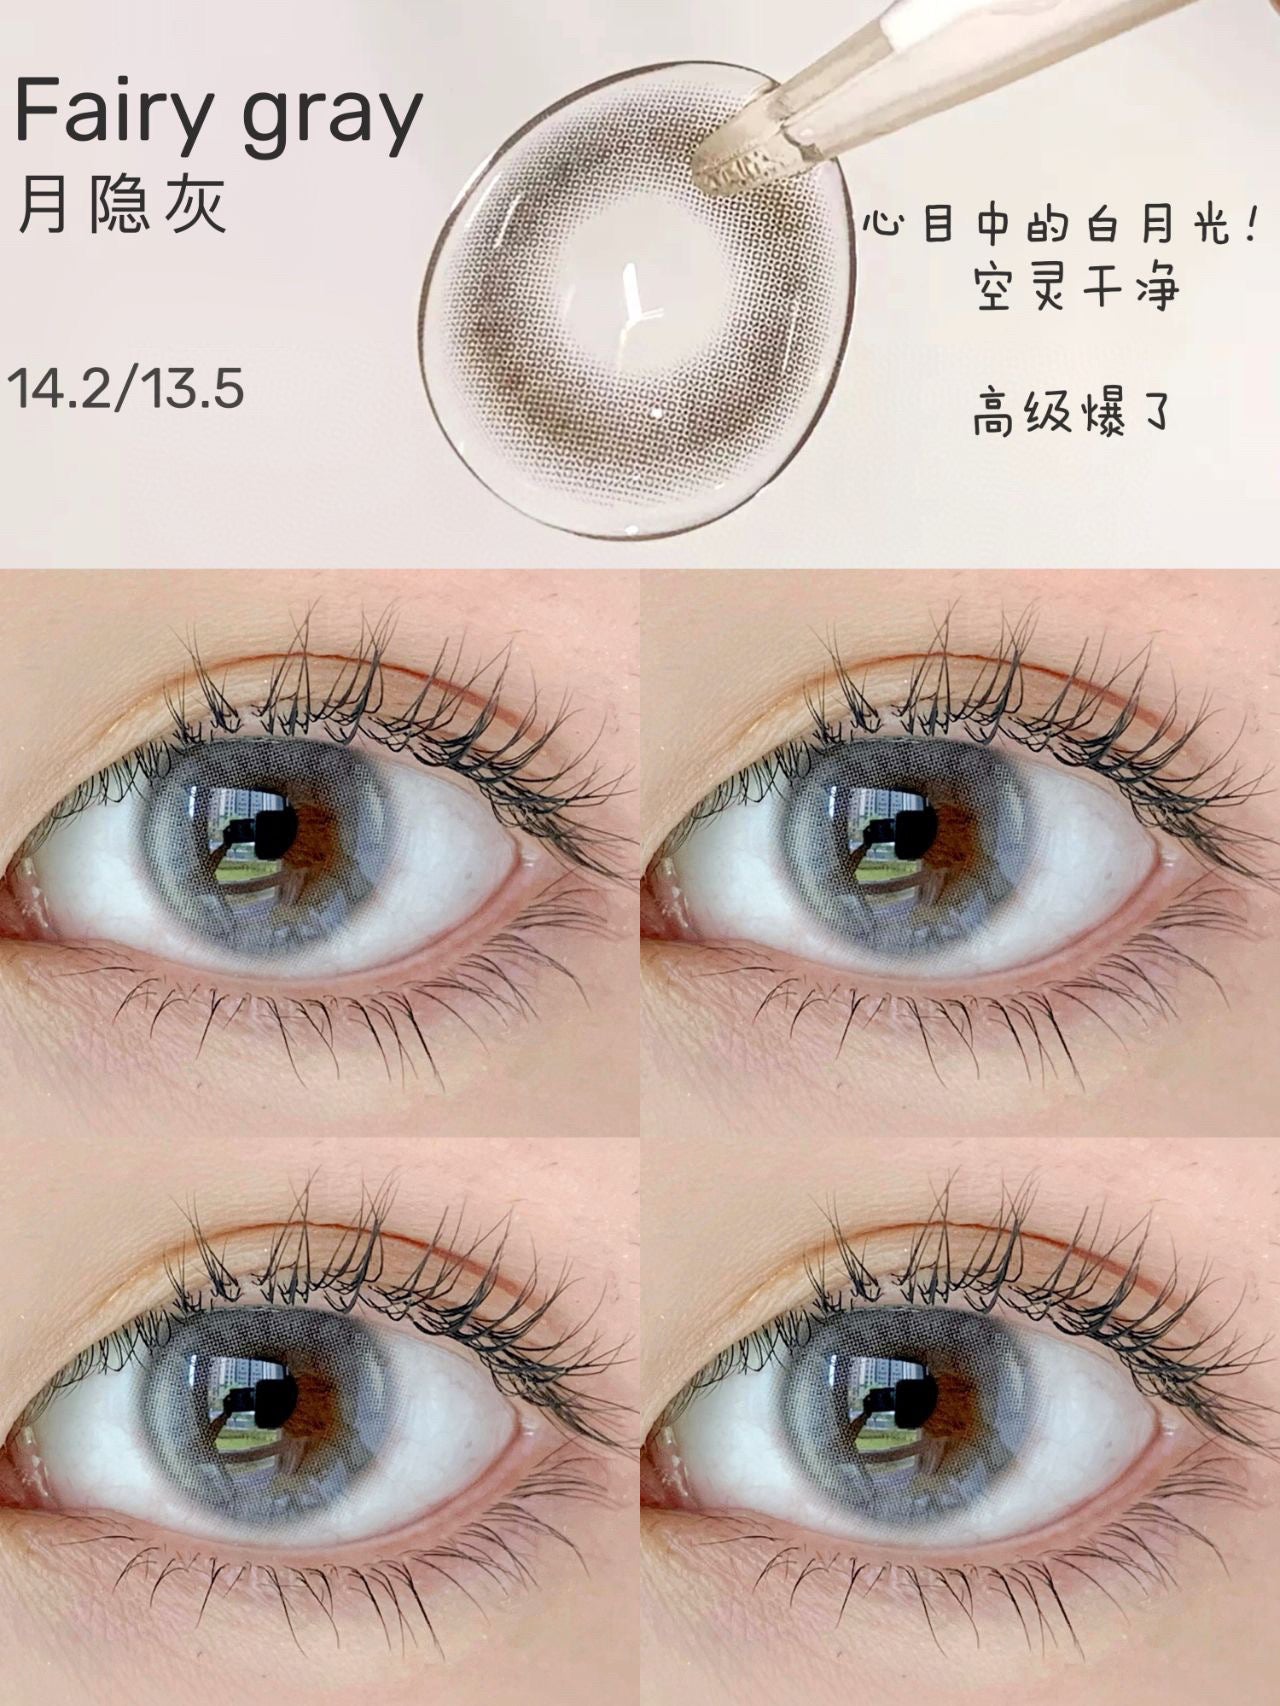 PUDDING BARRIEYES Fairy Gray | 1 Day, 6 Pcs